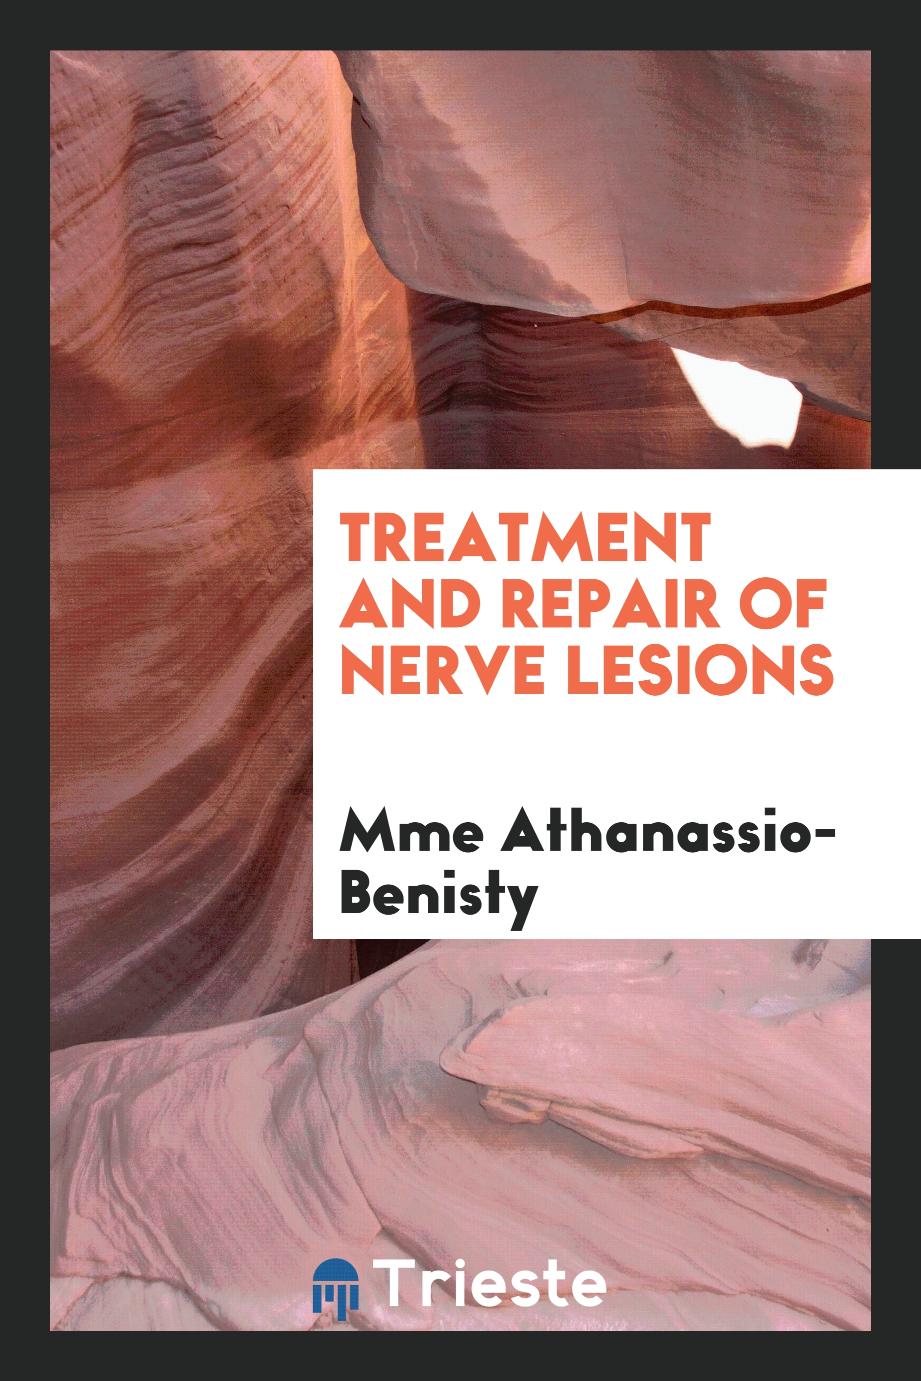 Treatment and repair of nerve lesions